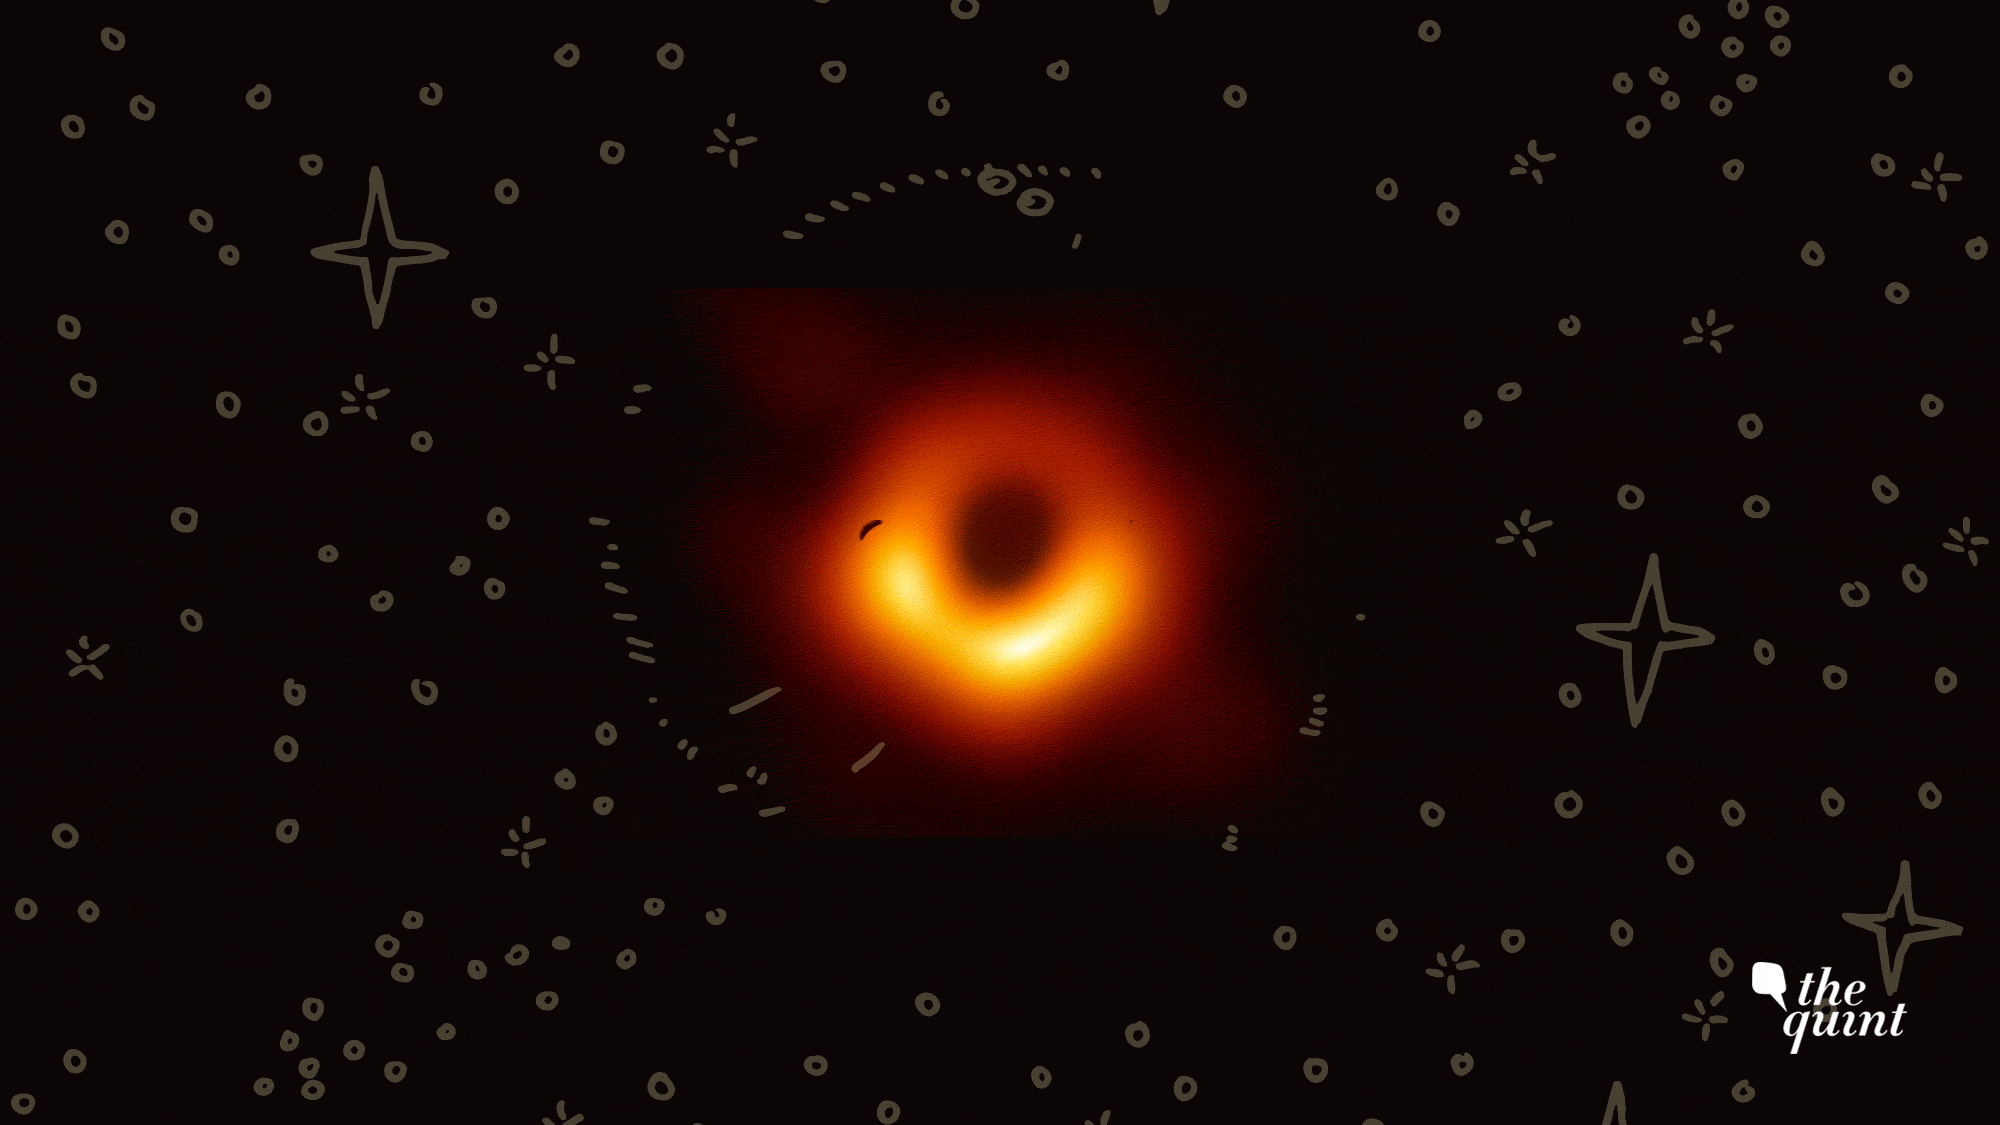 Black Hole Image How Indian Scientists Contributed In This Feat Will Wow You